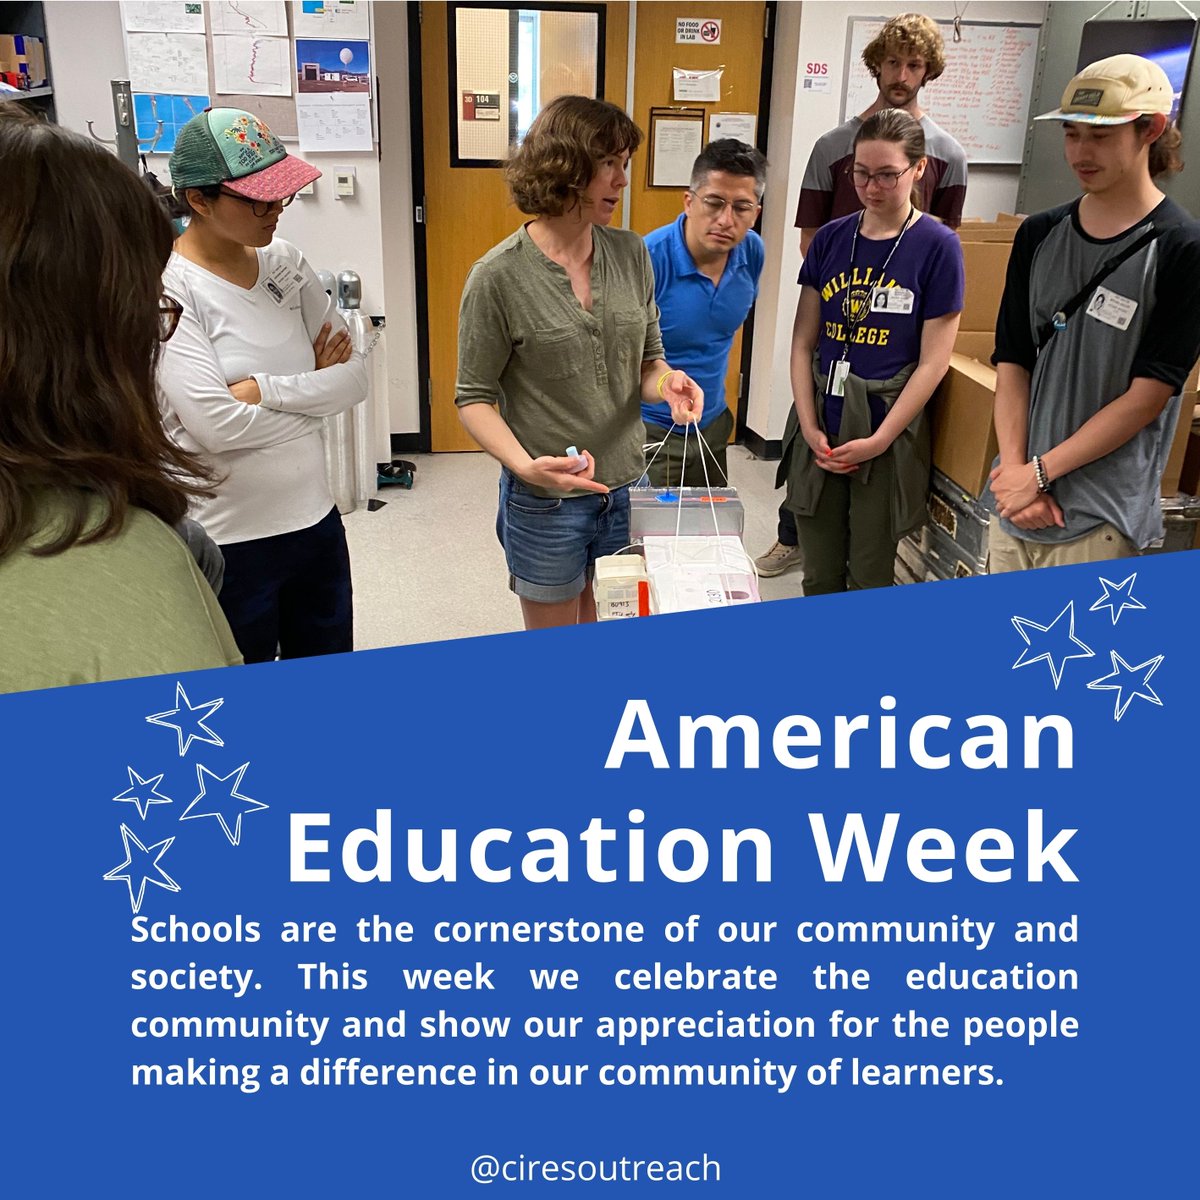 This week is #AmericanEducationWeek and we are highlighting the importance of climate literacy to ensure safe, just and equitable futures. Tune in this week to learn more about teaching #climateliteracy with  @ClimateLit